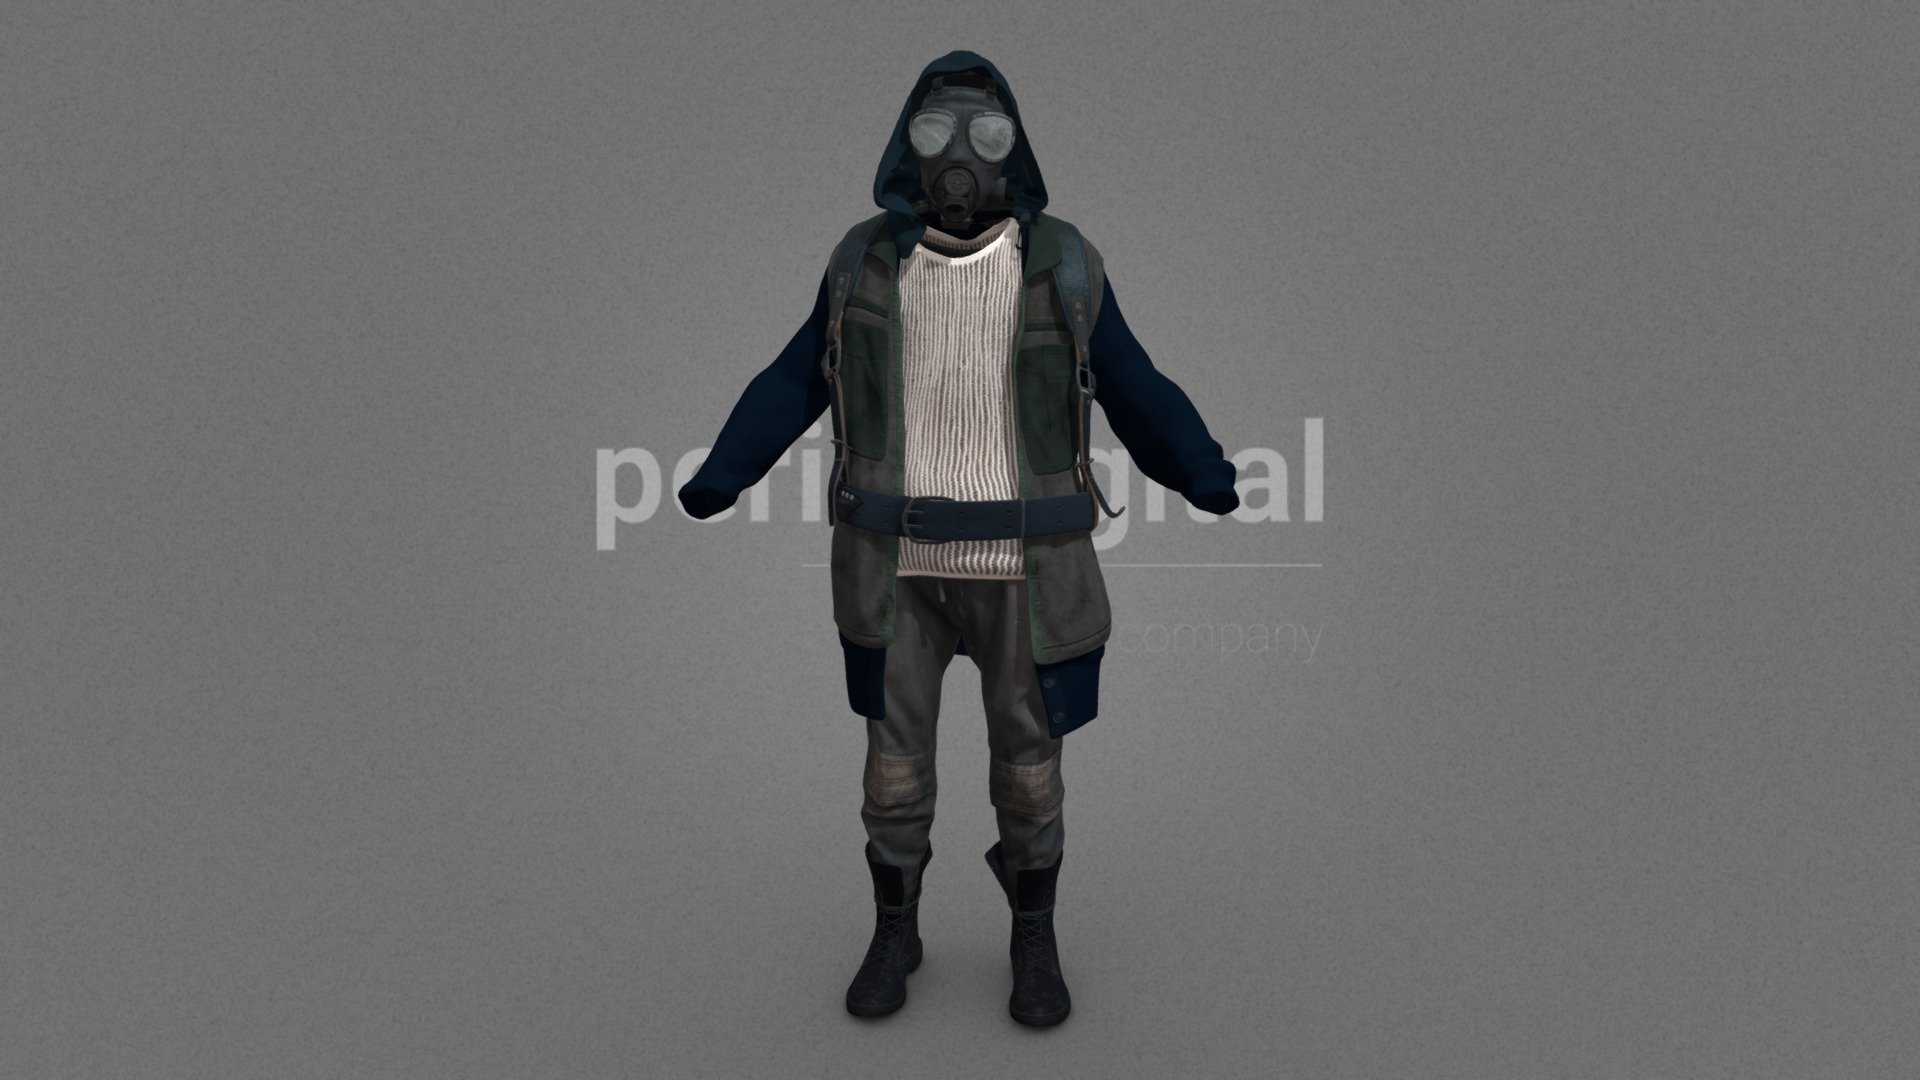 Gas mask, blue hooded jacket, harness with belt, white mesh T-shirt, pants with knee pads, military boots with laces




They are optimized for use in 3D scenes of high polygonalization and optimized for rendering.

We do not include characters, but they are positioned for you to include and adjust your own character.

They have a model LOW (_LODRIG) inside the Blender file (included in the AdditionalFiles), which you can use for vertex weighting or cloth simulation and thus, make the transfer of vertices or property masks from the LOW to the HIGH** model.

We have included the texture maps in high resolution, as well as the Displacement maps, so you can make extreme point of view with your 3D cameras, as well as the Blender file so you can edit any aspect of the set. 

Enjoy it.

Web: https://peris.digital/ - Wasteland Series - Model 01 - 3D model by Peris Digital (@perisdigital) 3d model